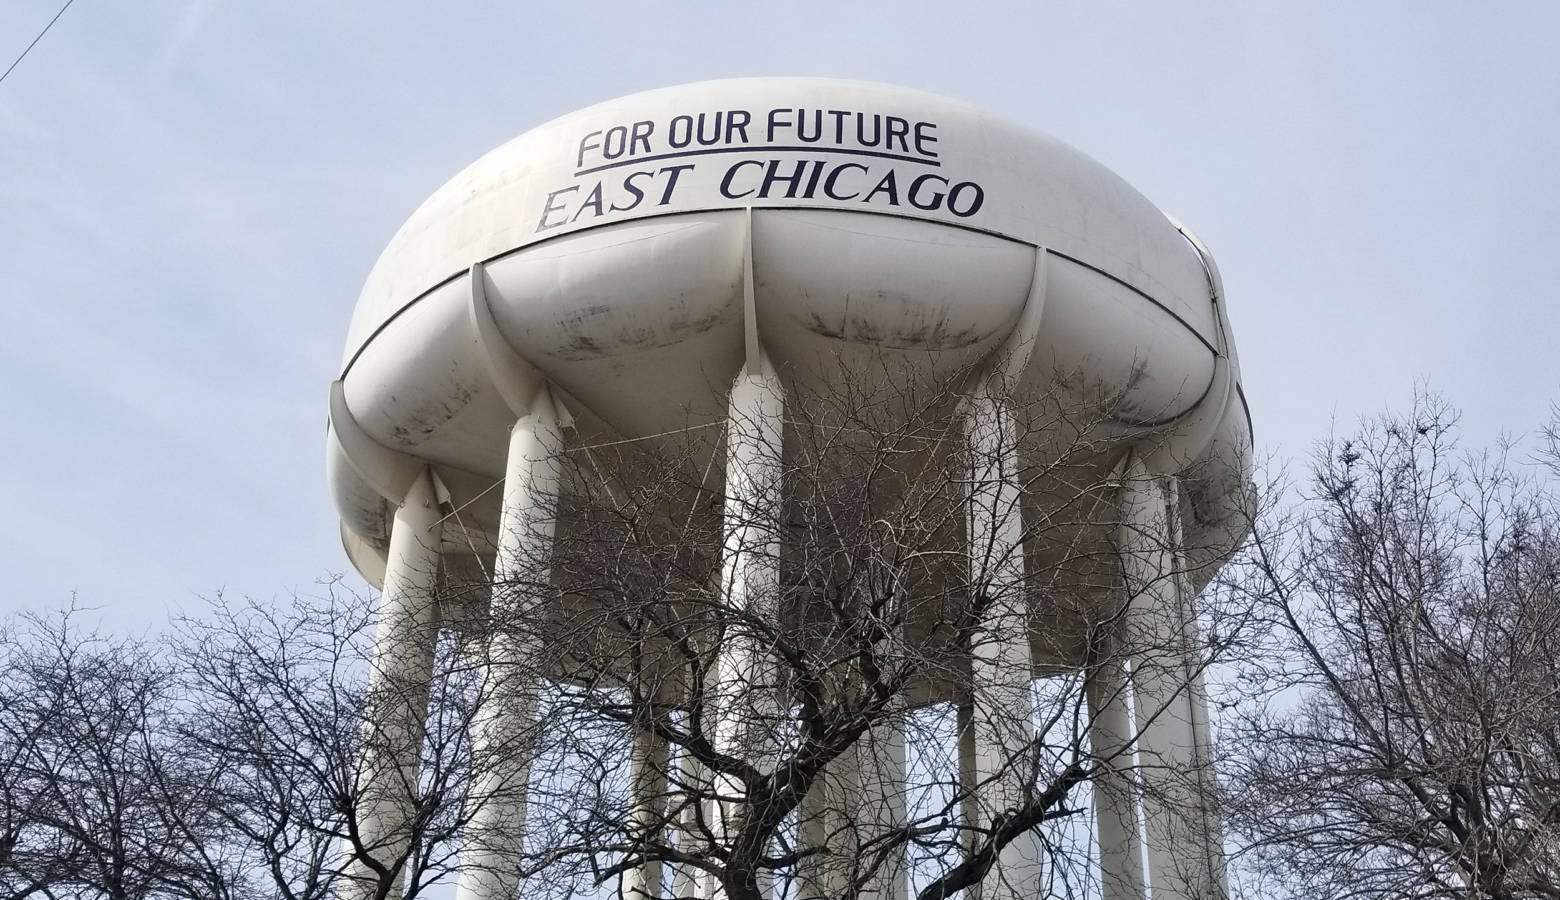 East Chicago residents get their water from Lake Michigan, but EPA officials say they could decided to clean up any contamination in the groundwater to drinking water standards. (Samantha Horton/IPB News)